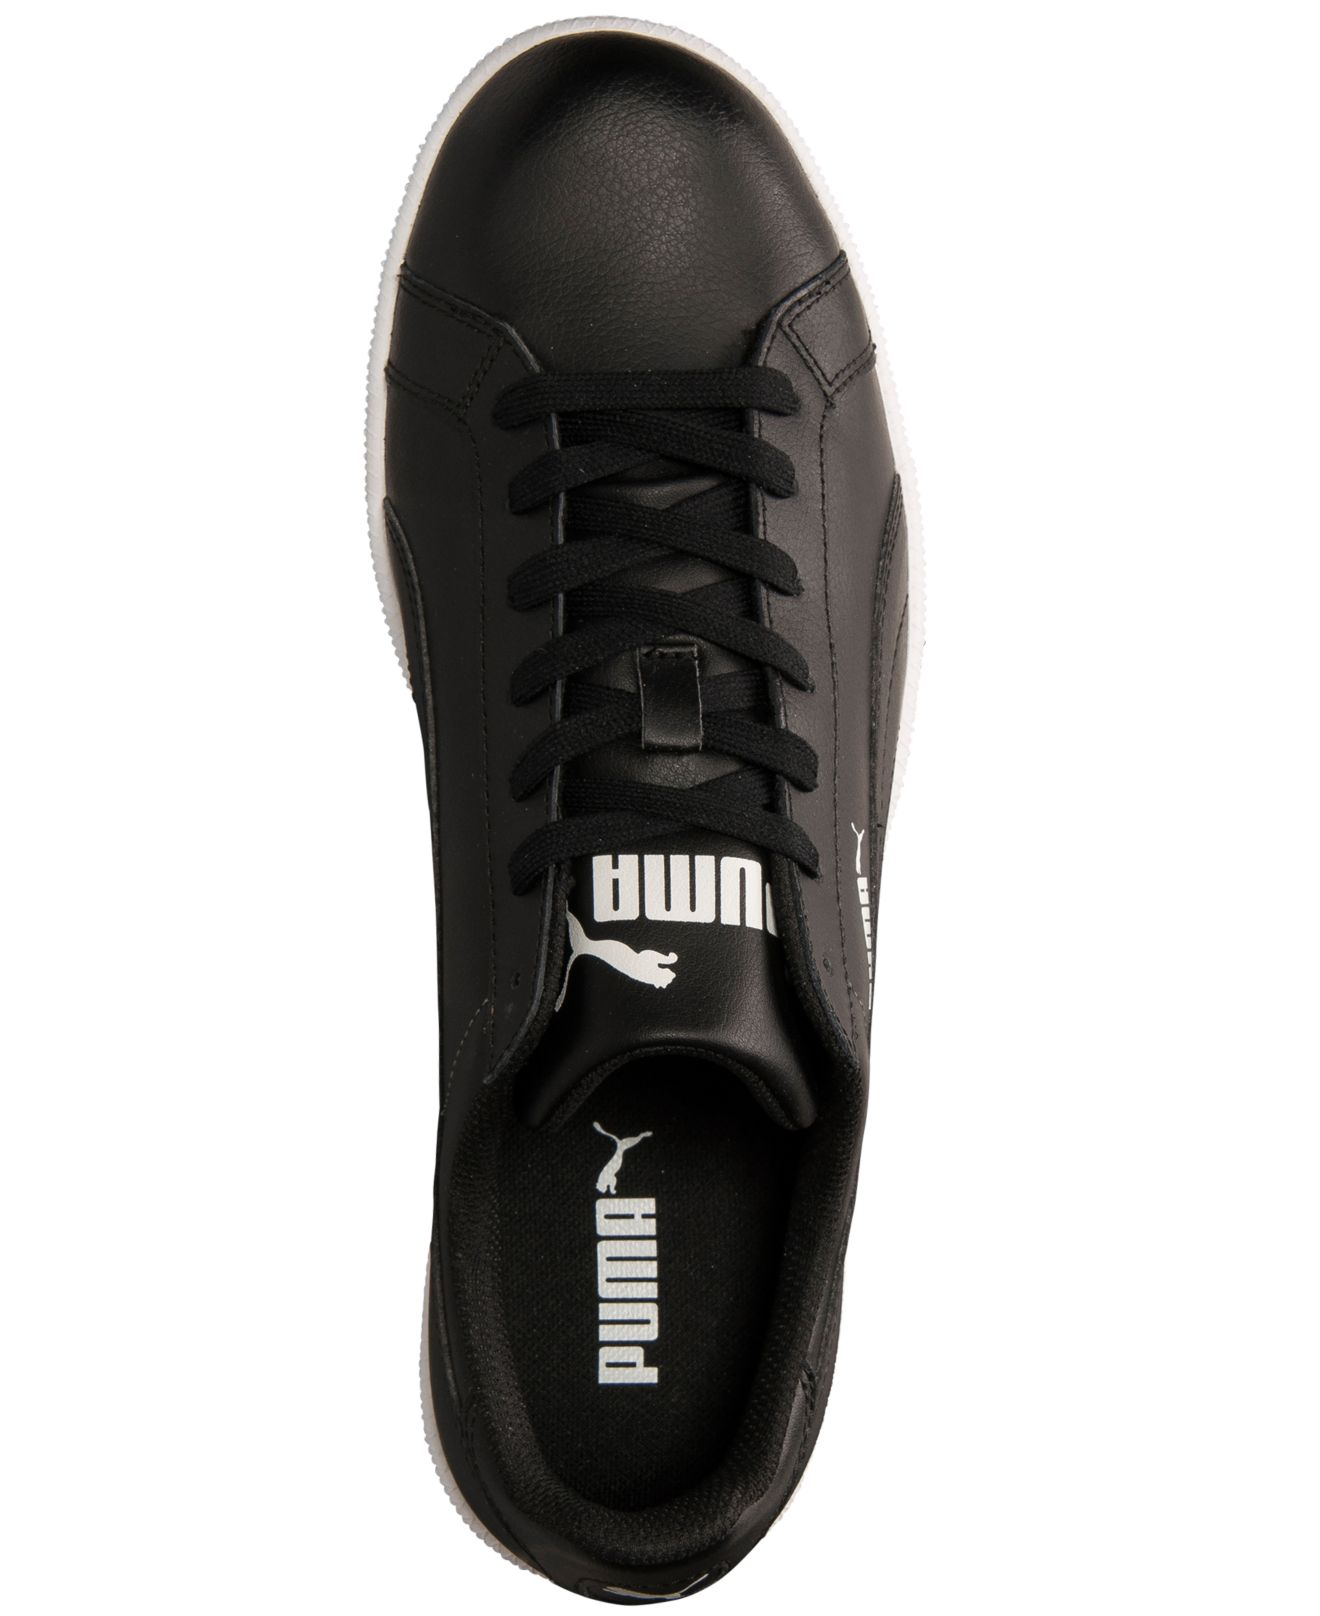 Lyst - Puma Men'S Smash Leather Casual Sneakers From Finish Line in ...